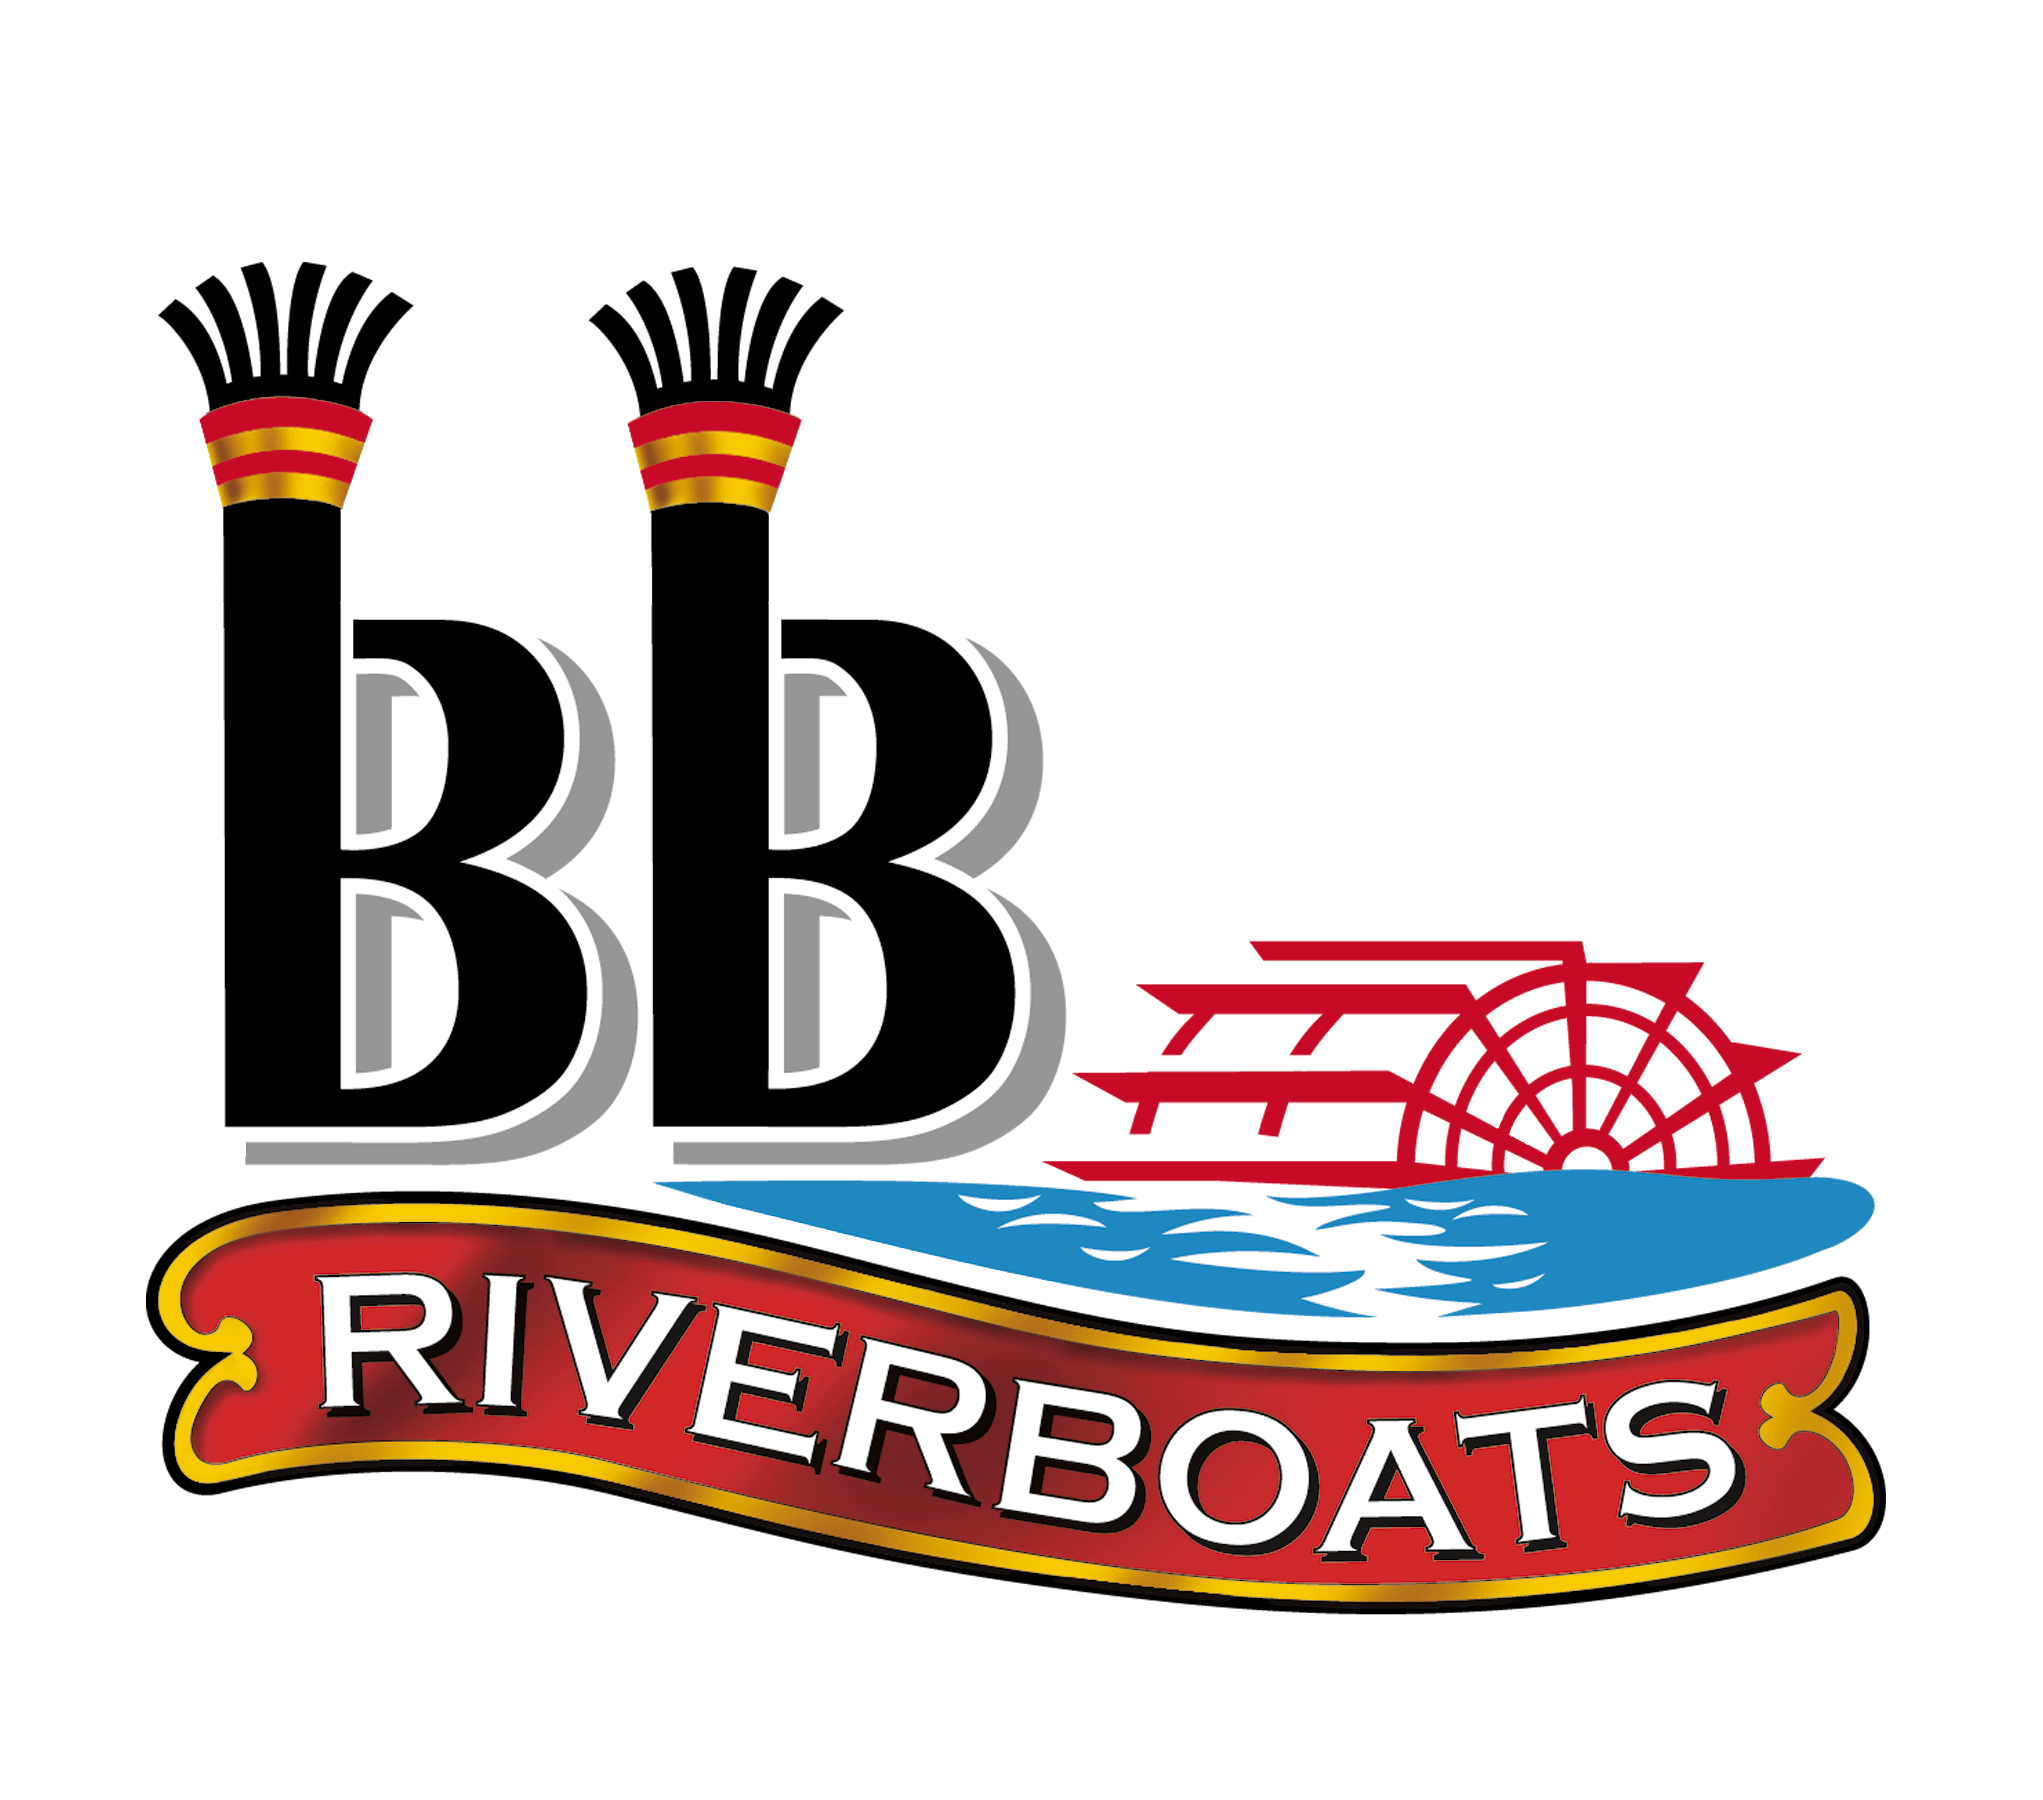 riverboat clipart - photo #28